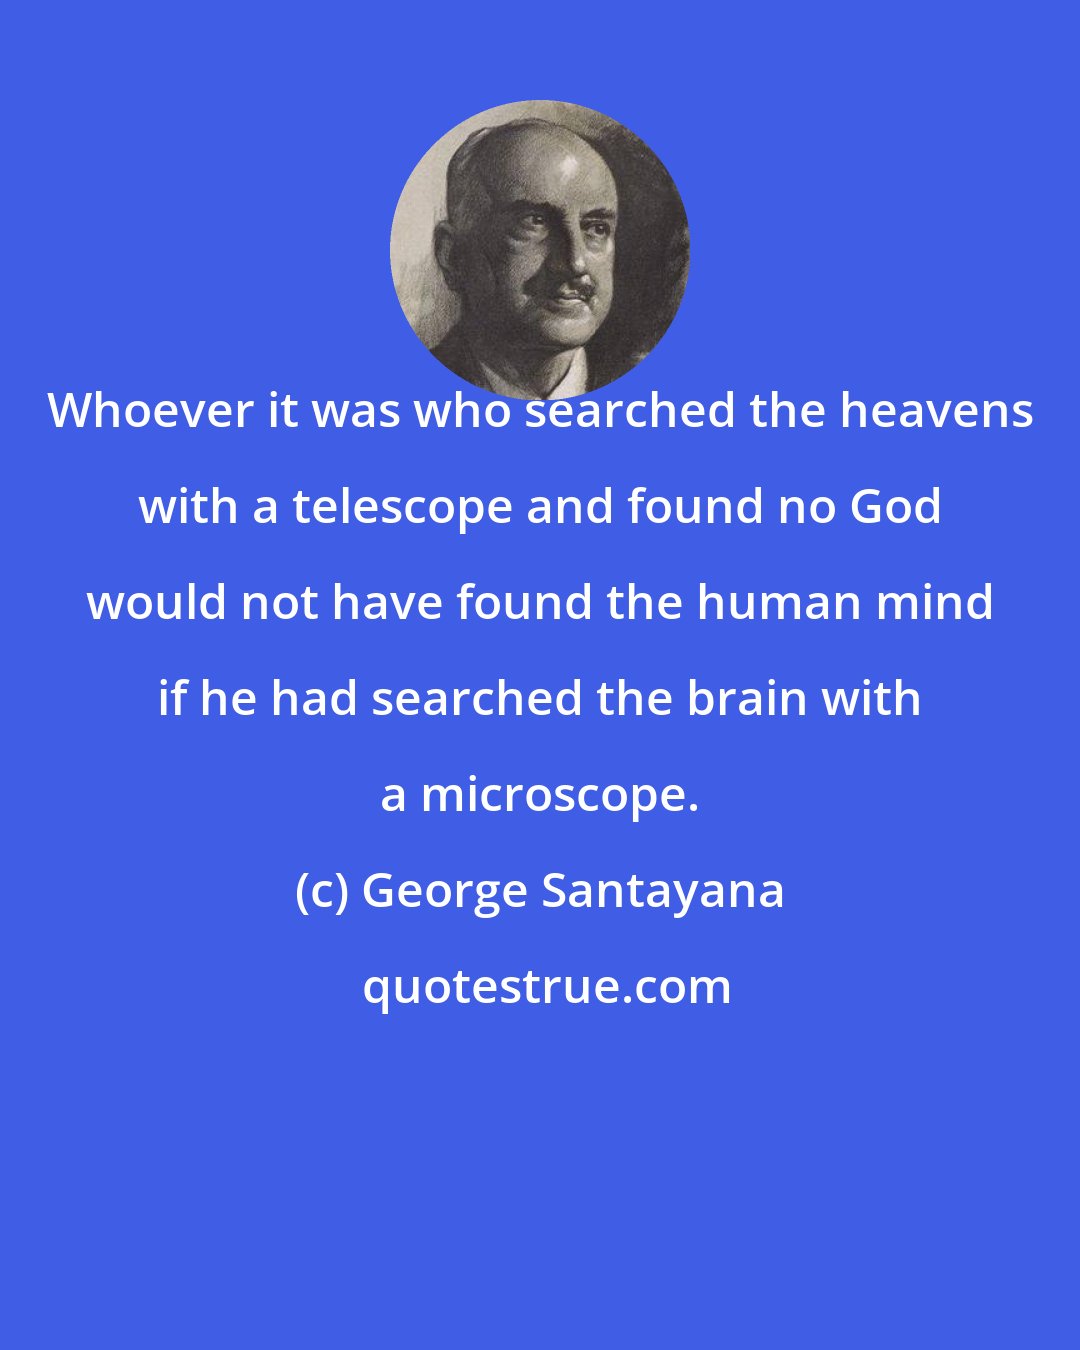 George Santayana: Whoever it was who searched the heavens with a telescope and found no God would not have found the human mind if he had searched the brain with a microscope.